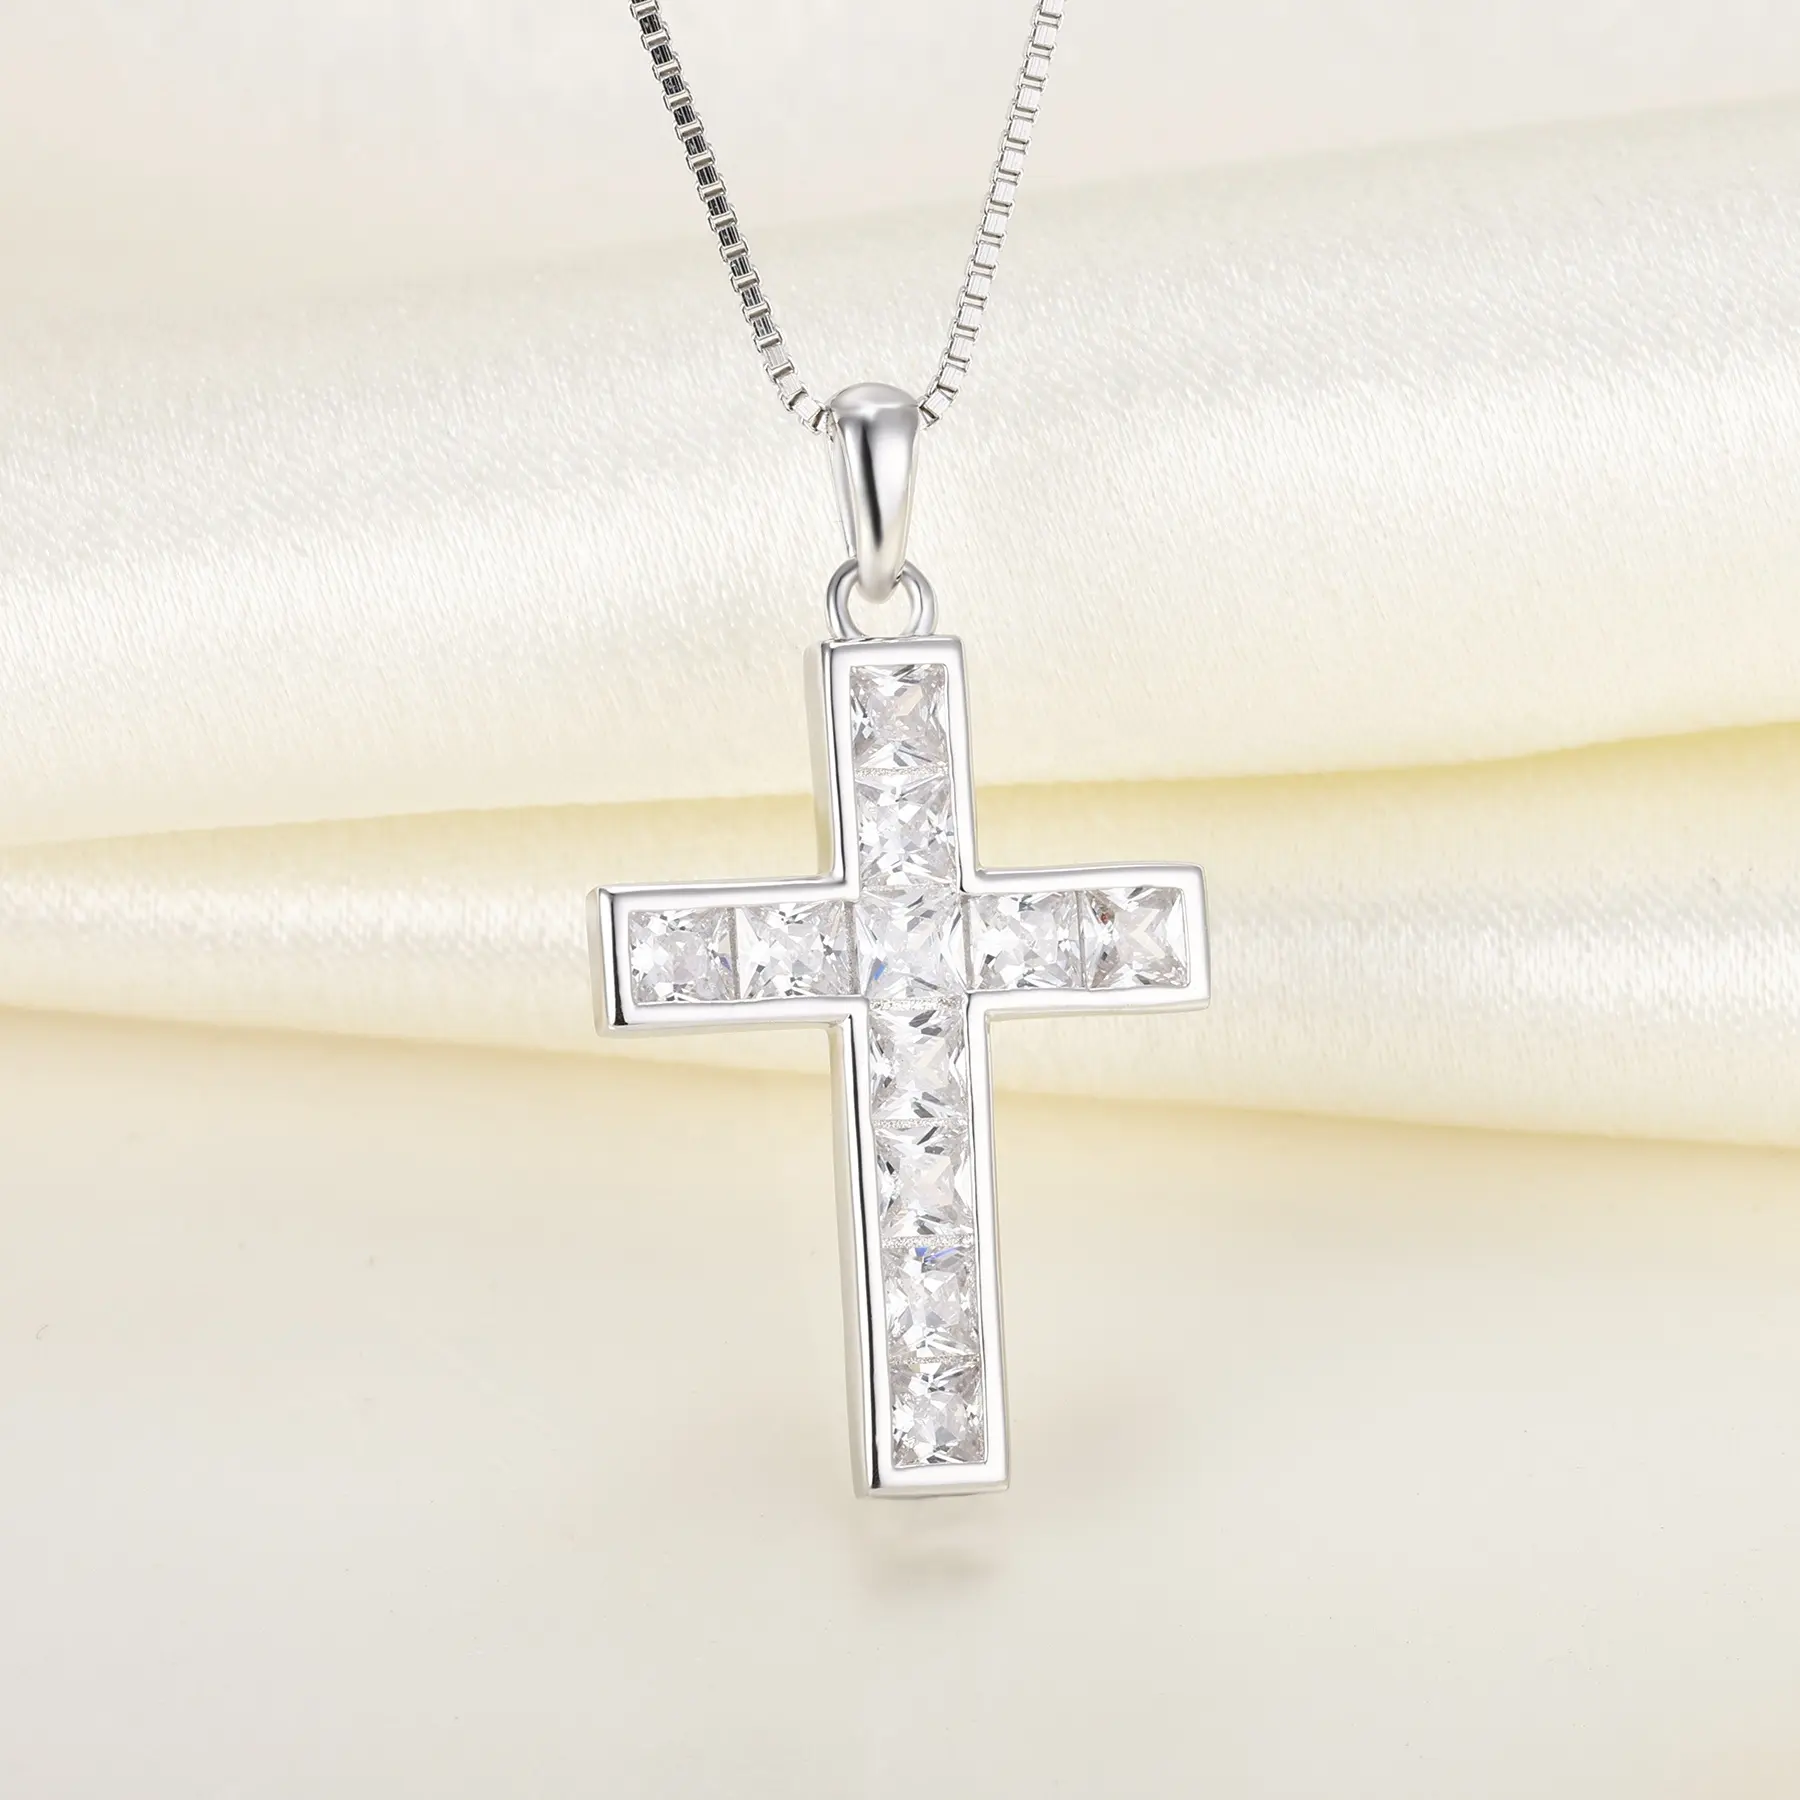 Stylish 925 sterling silver Cross Necklace Jewelry European classic Hiphop cross pendant necklace for men